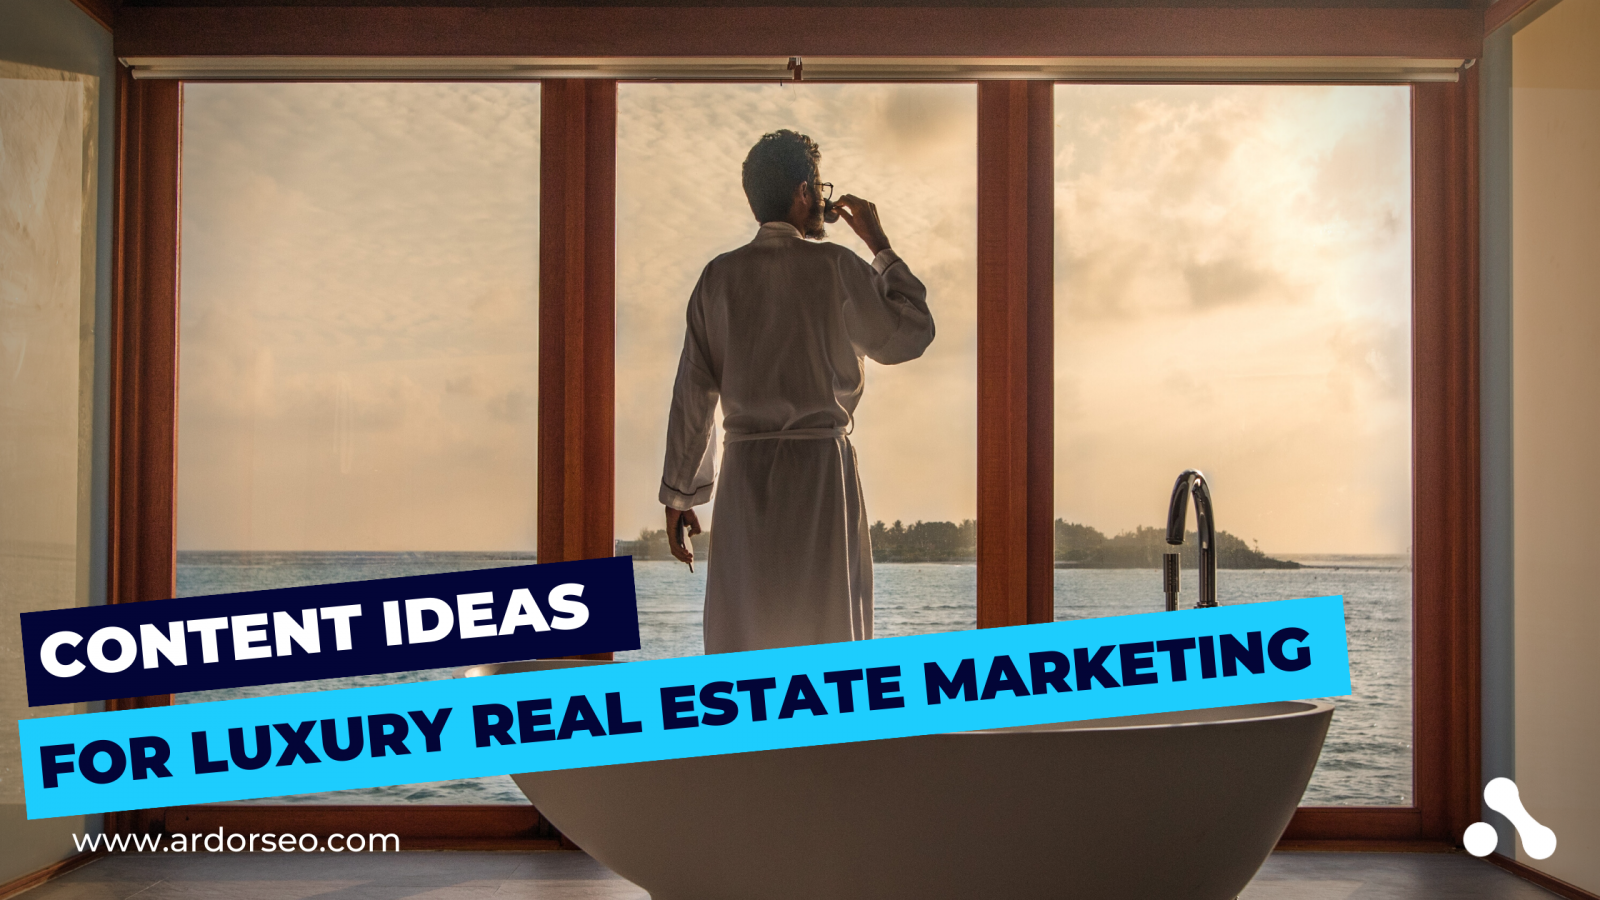 Marketing luxury real estate needs luxurious content.